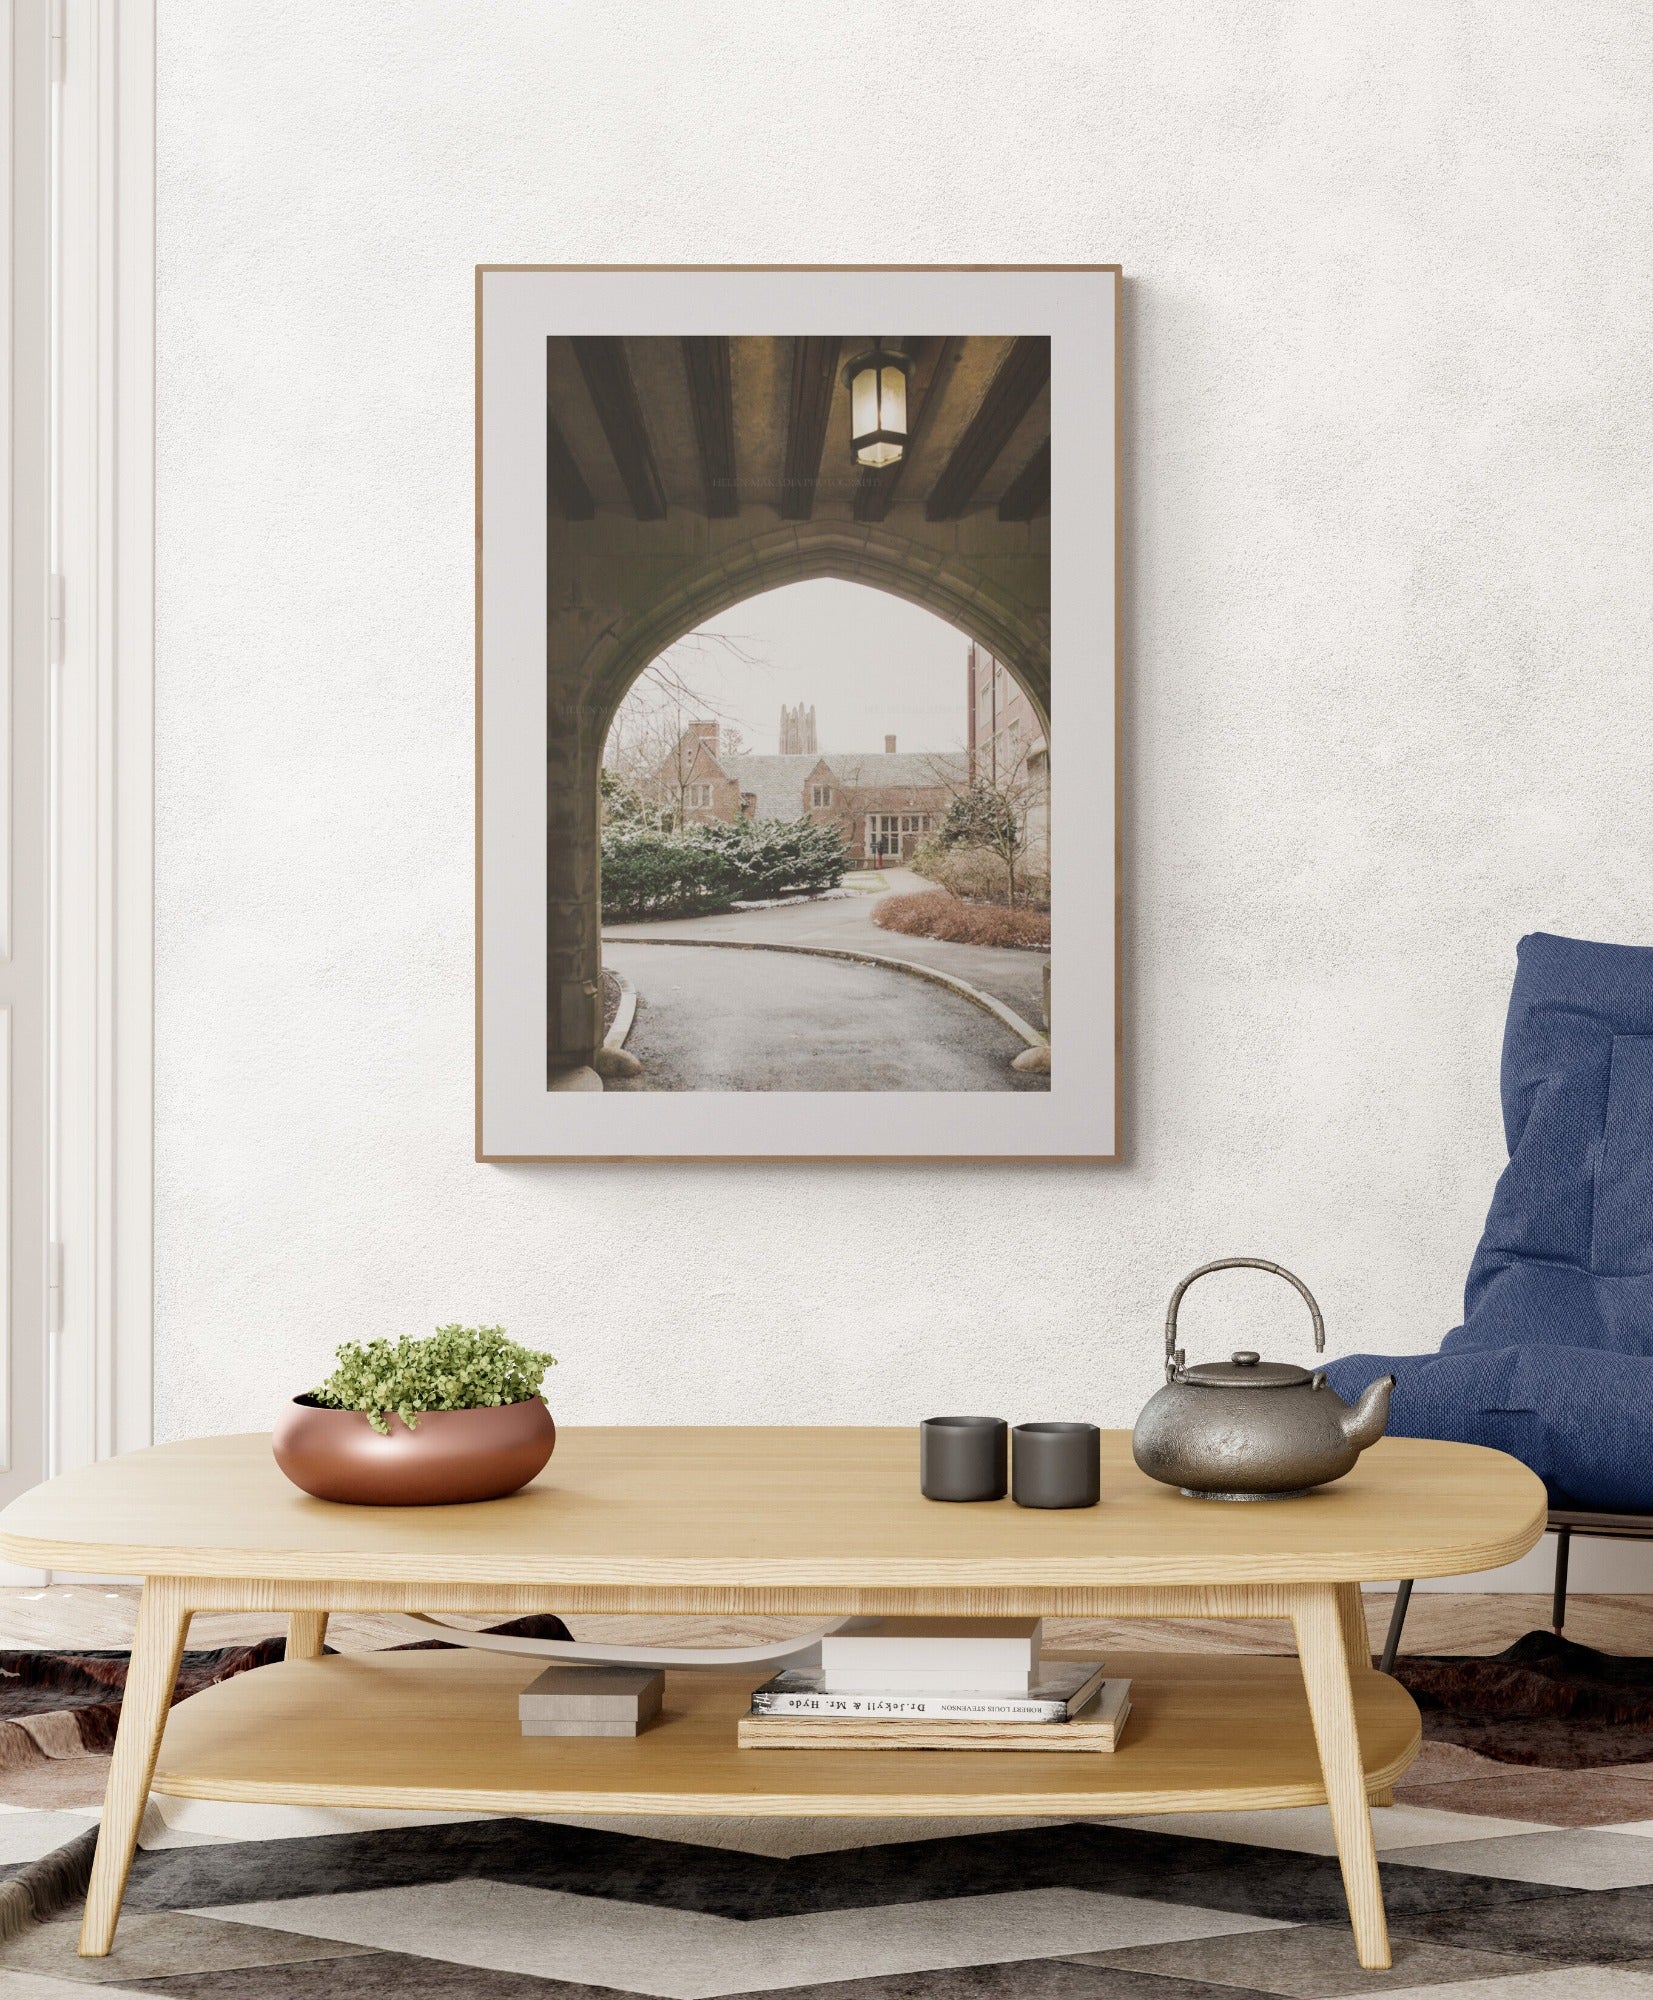 Wellesley College Photograph as Wall Art in a Living Room